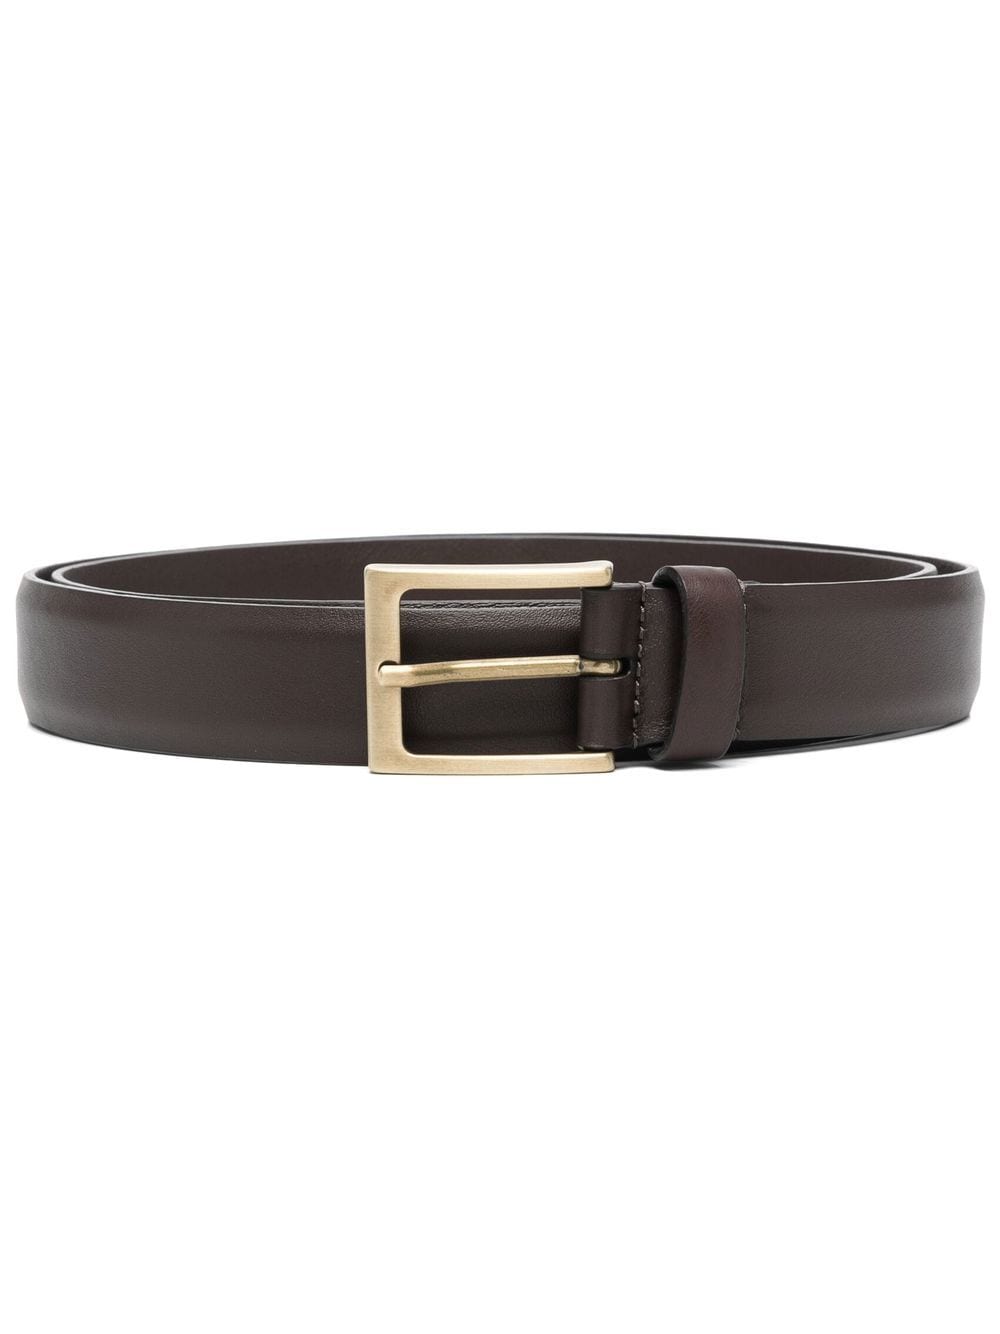 D4.0 Classic Leather Belt In Brown